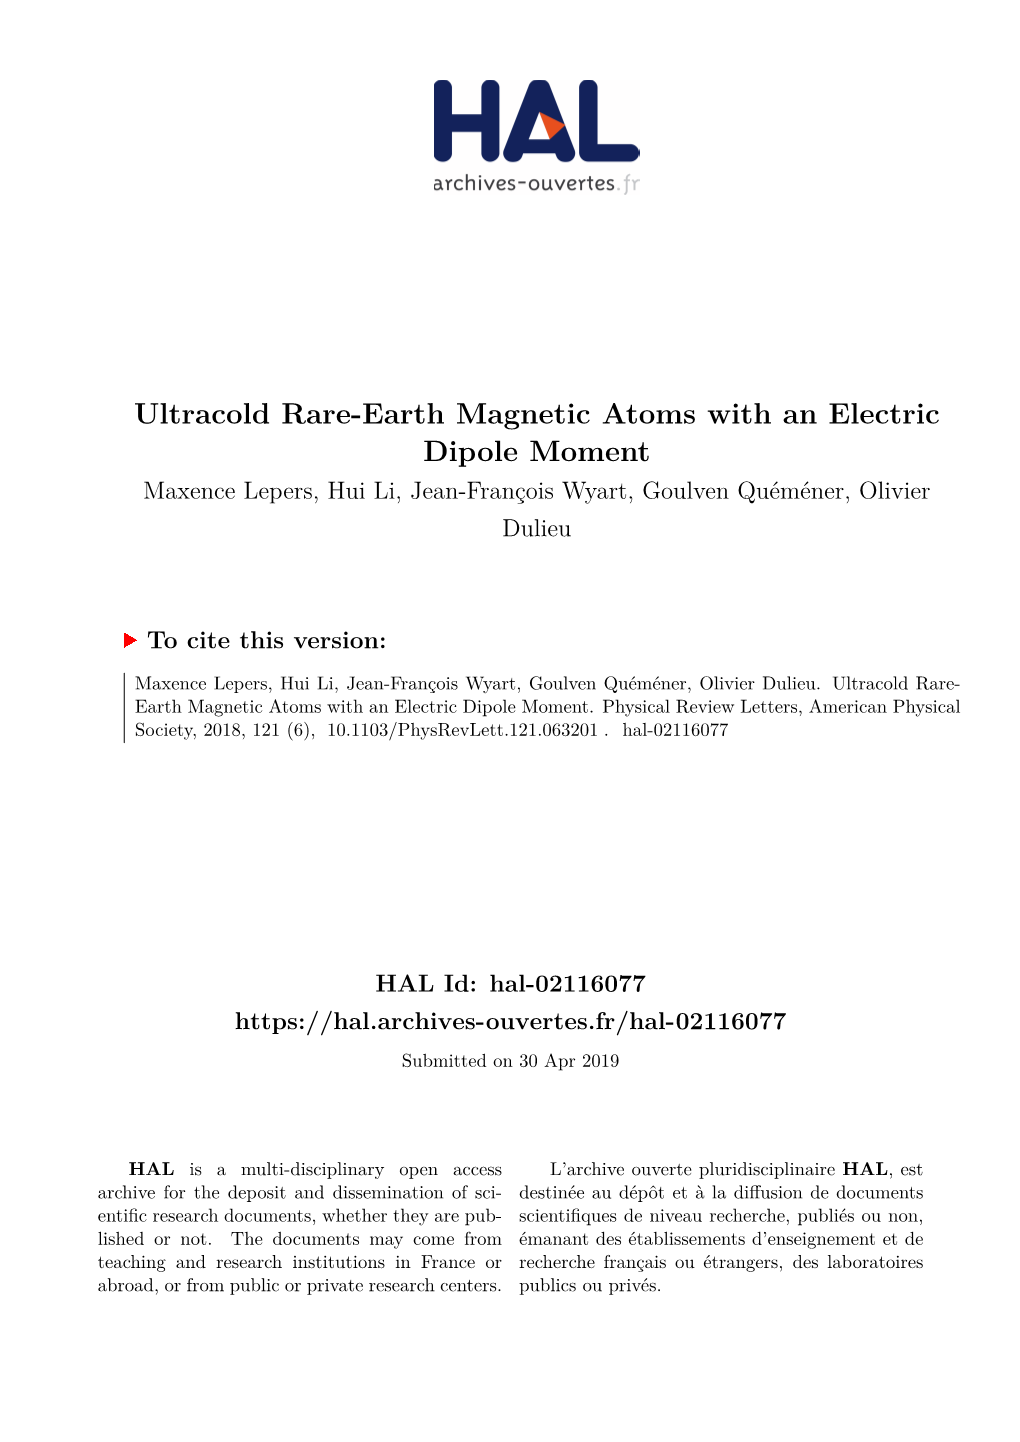 Ultracold Rare-Earth Magnetic Atoms with an Electric Dipole Moment Maxence Lepers, Hui Li, Jean-François Wyart, Goulven Quéméner, Olivier Dulieu